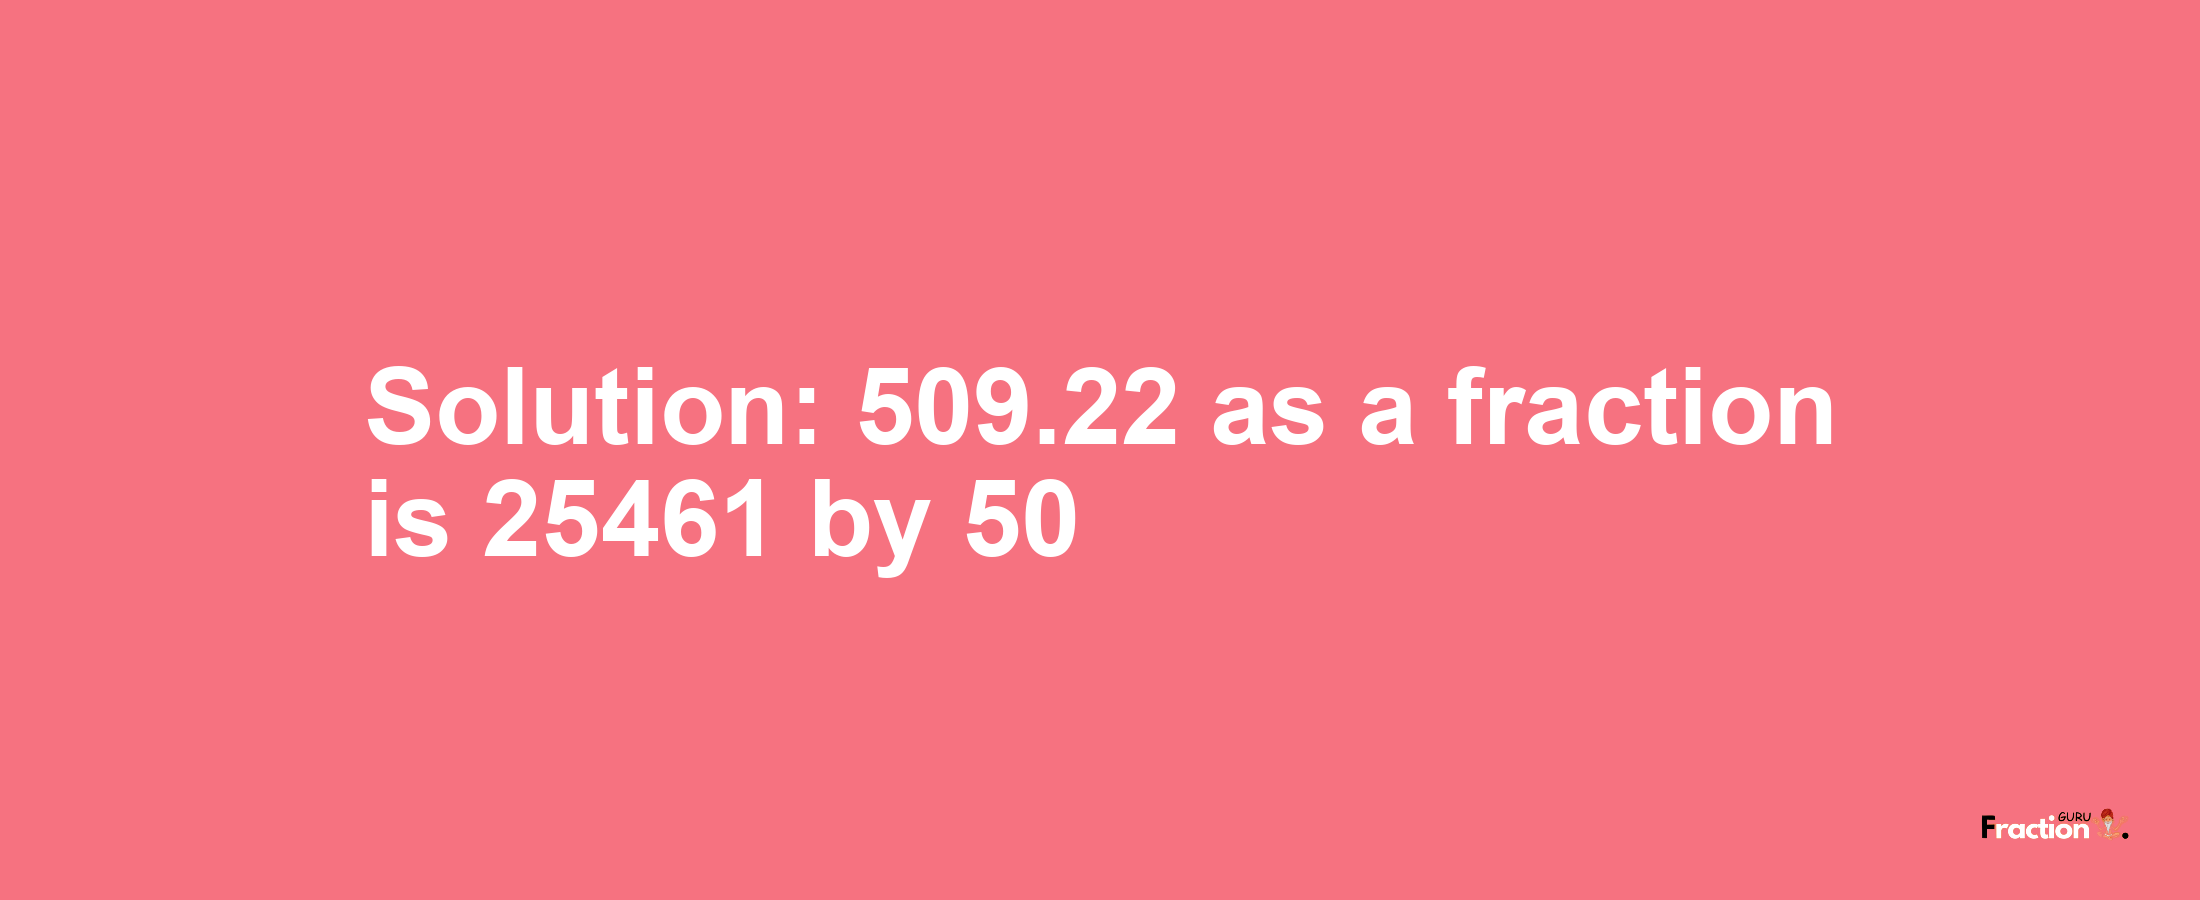 Solution:509.22 as a fraction is 25461/50